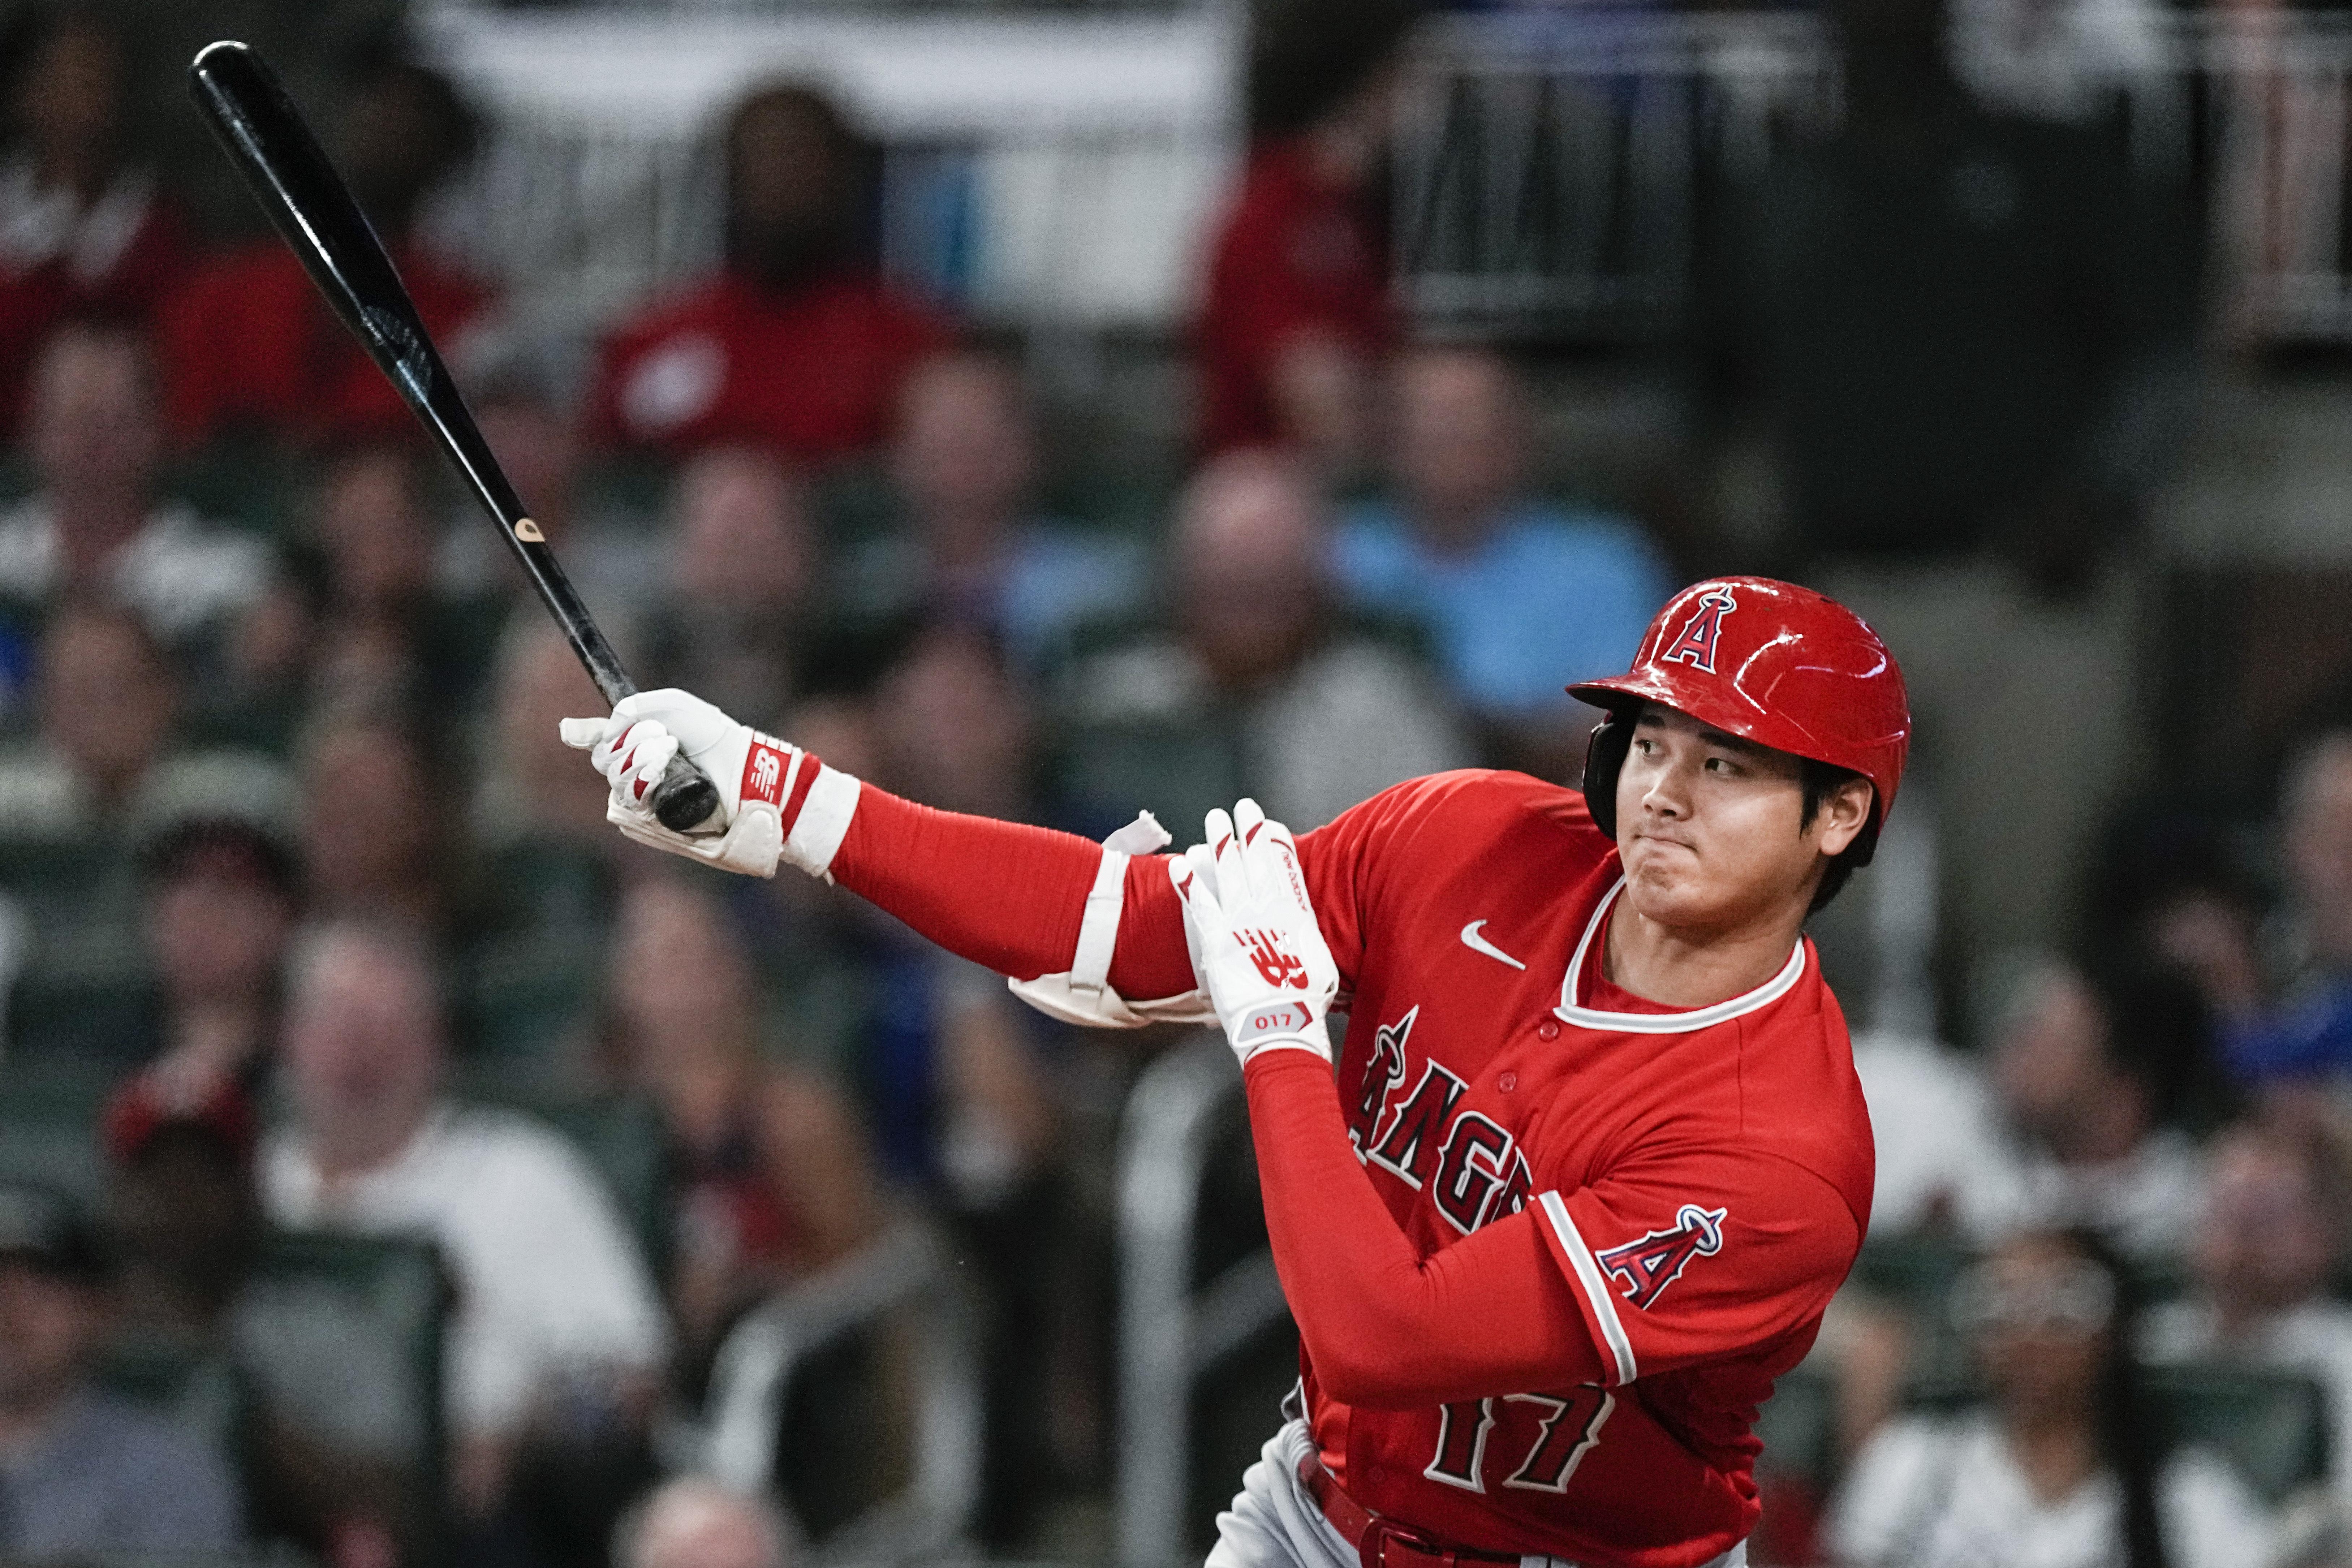 Shohei Ohtani homers twice as Angels rout White Sox - Los Angeles